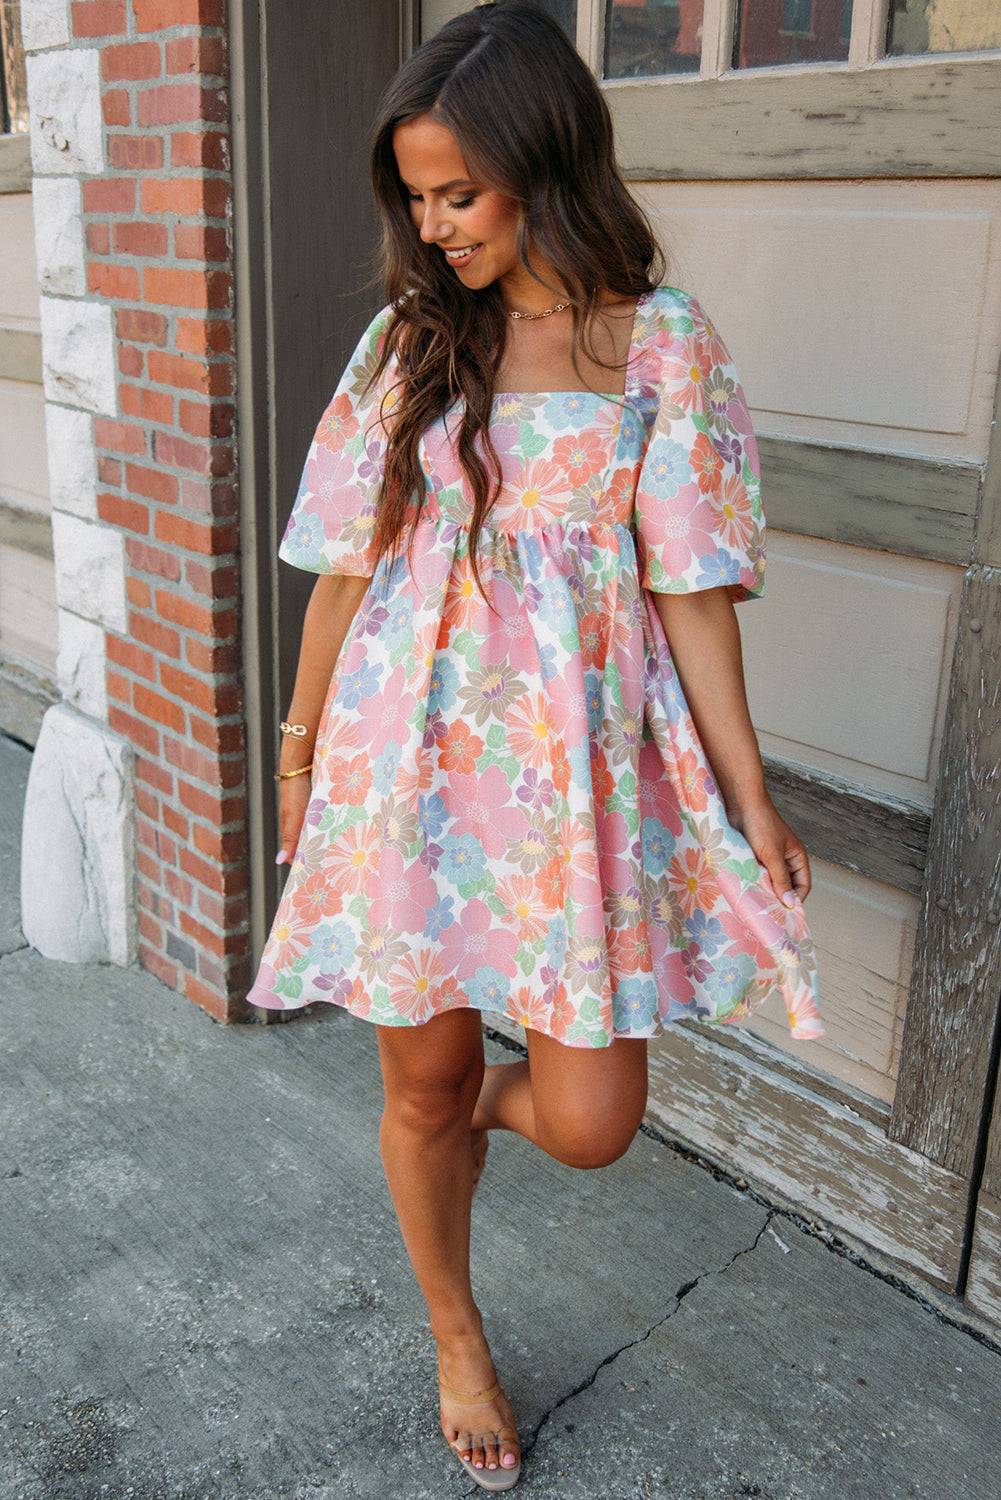 a woman in a floral dress is standing on the sidewalk